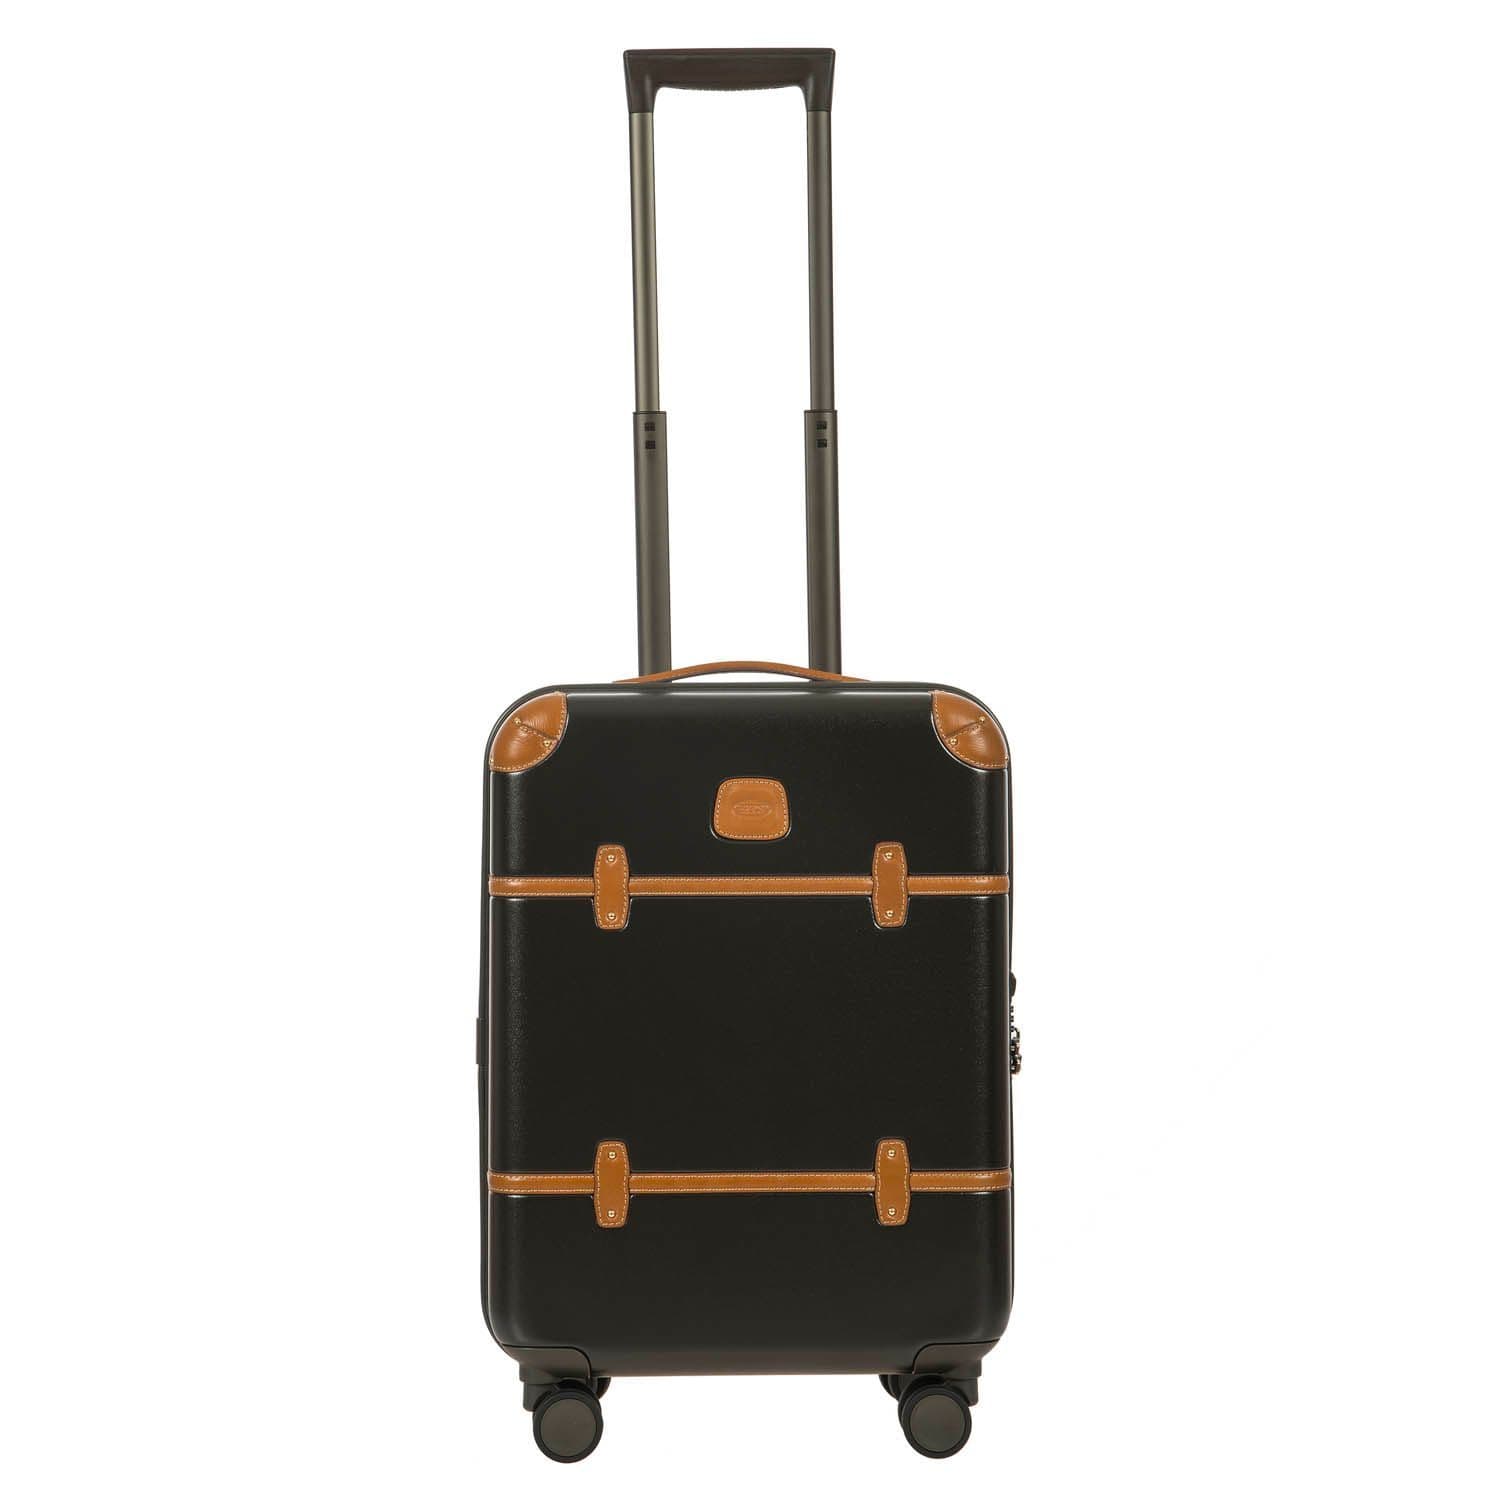 Bellagio 550mm Spinner Trunk With Organizer Luggage Bric's Olive 